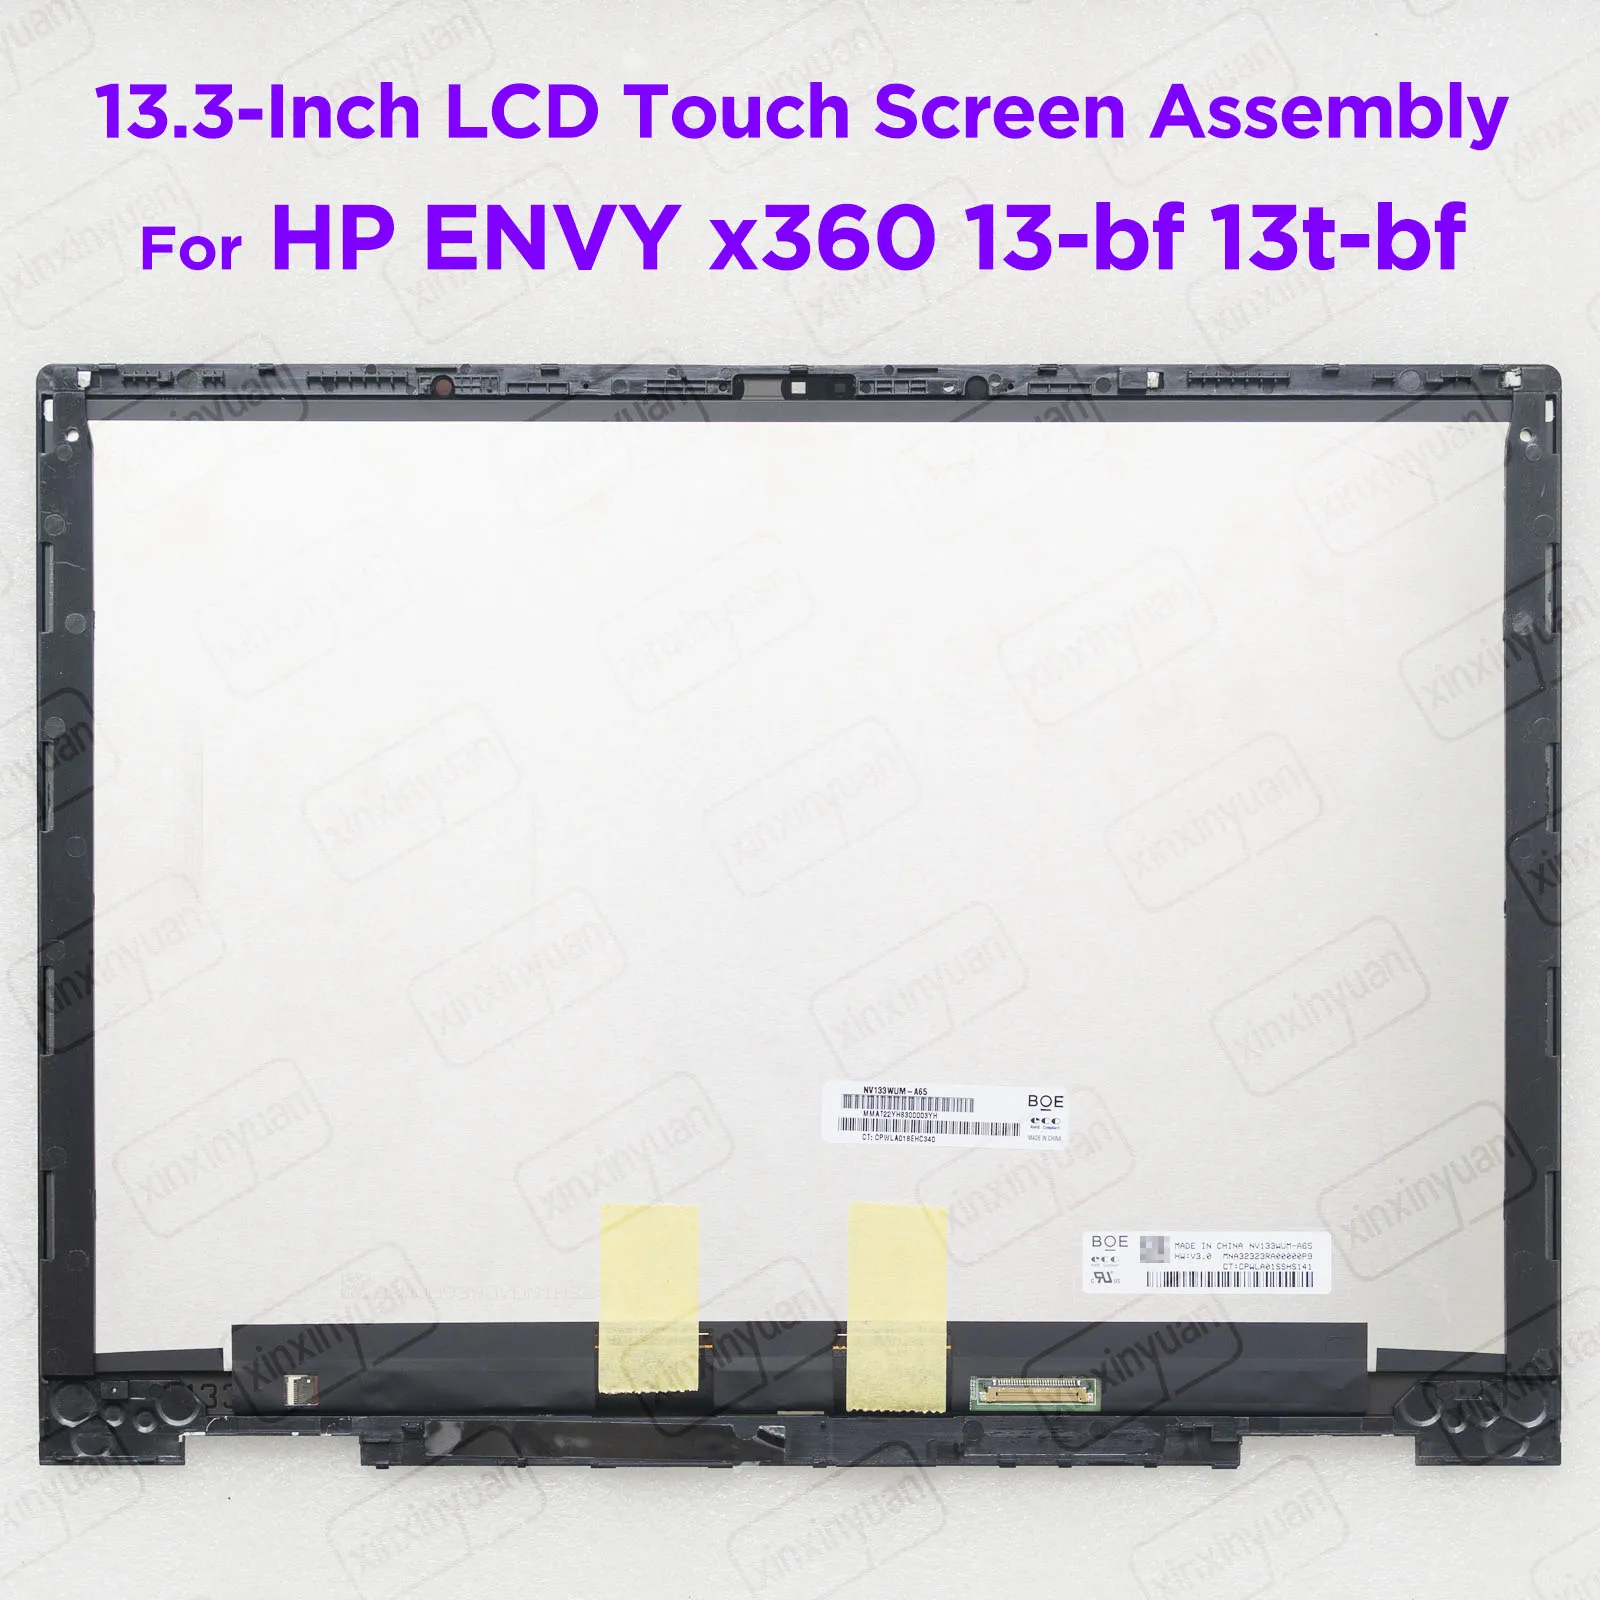 

13.3" LCD Touch Screen Assembly for HP ENVY X360 13-bf 13t-bf AM-OLED Display Panel Replacement ATNA333AA01